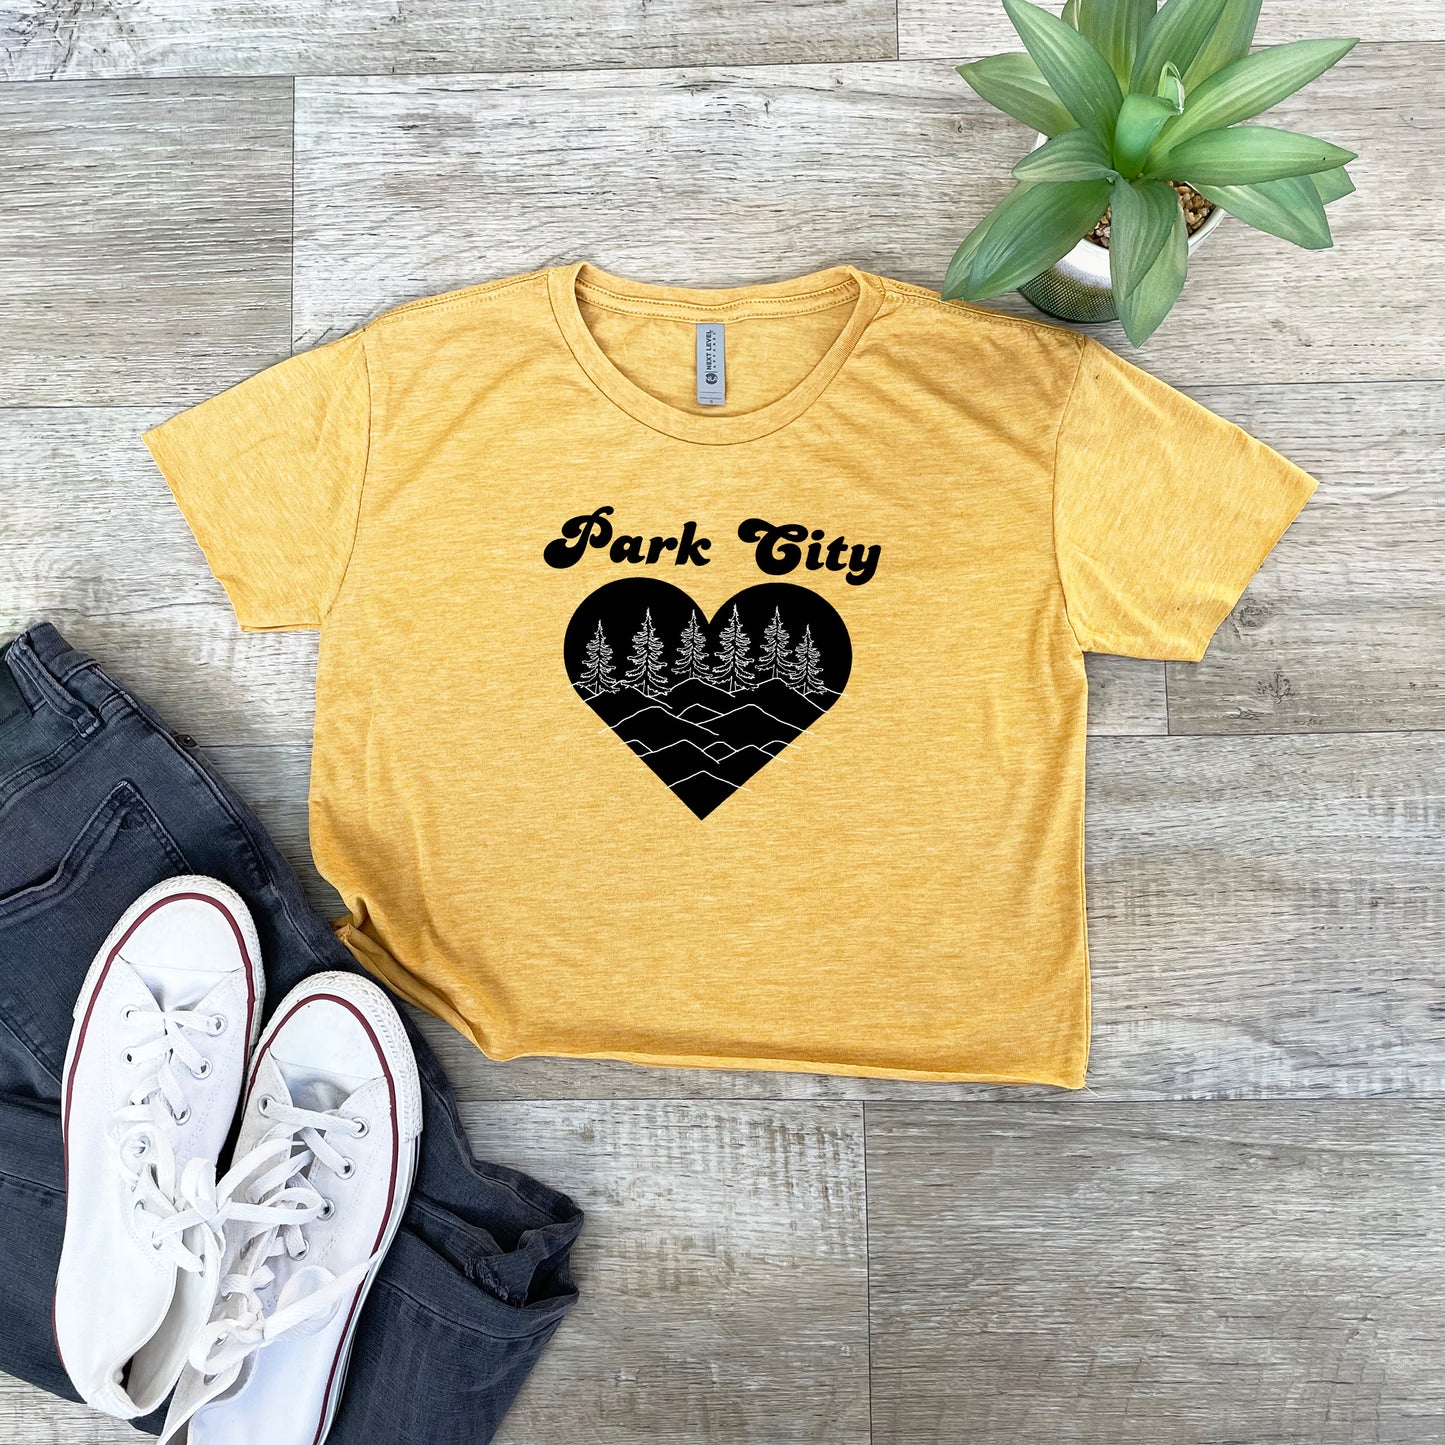 a t - shirt that says park city with a heart on it